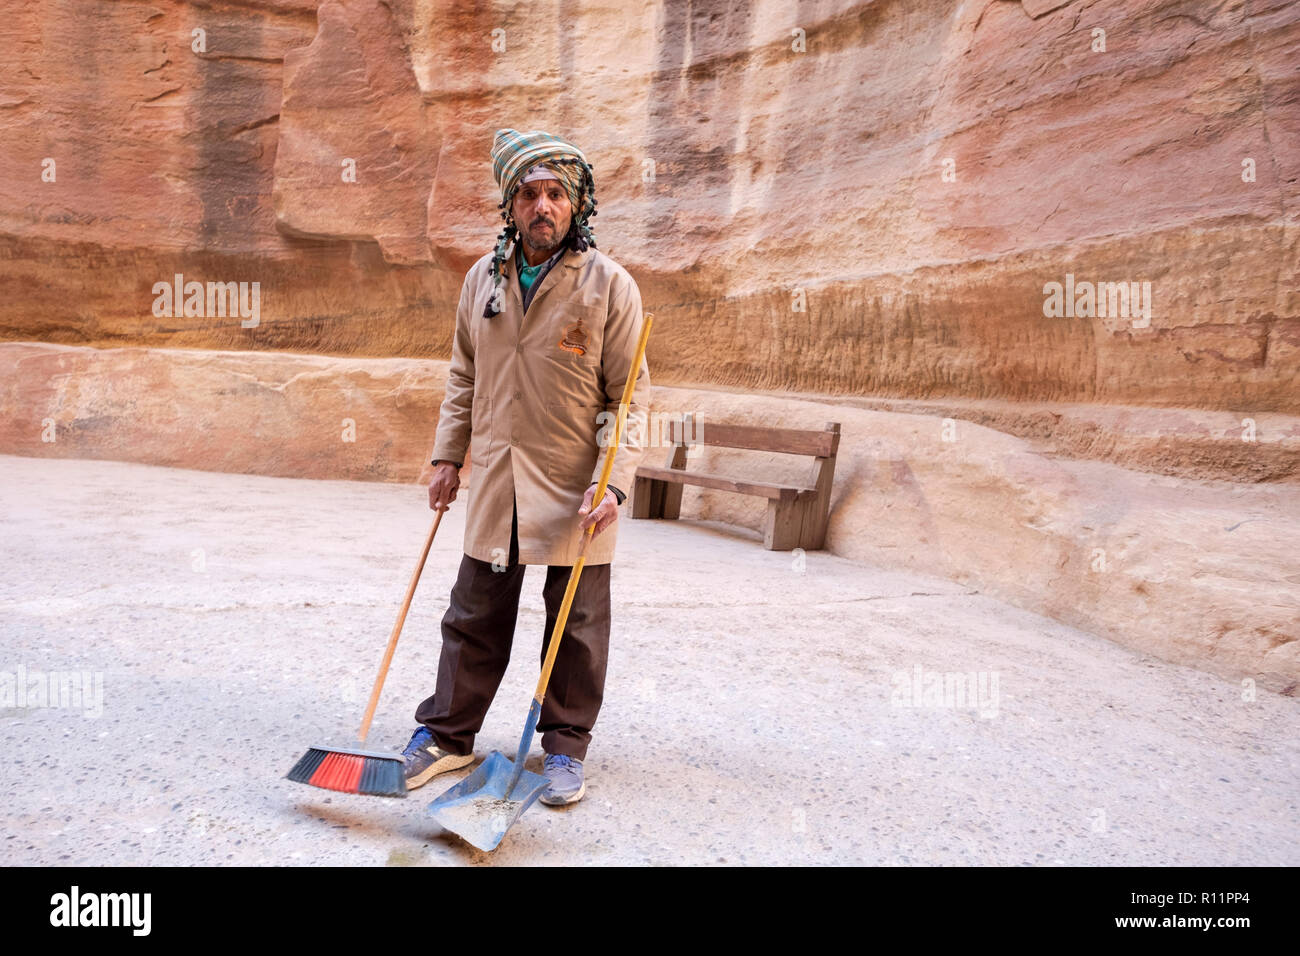 A Jordanian worker with a broom and shovel in Petra a historical and archeological city in South Jordan. Stock Photo